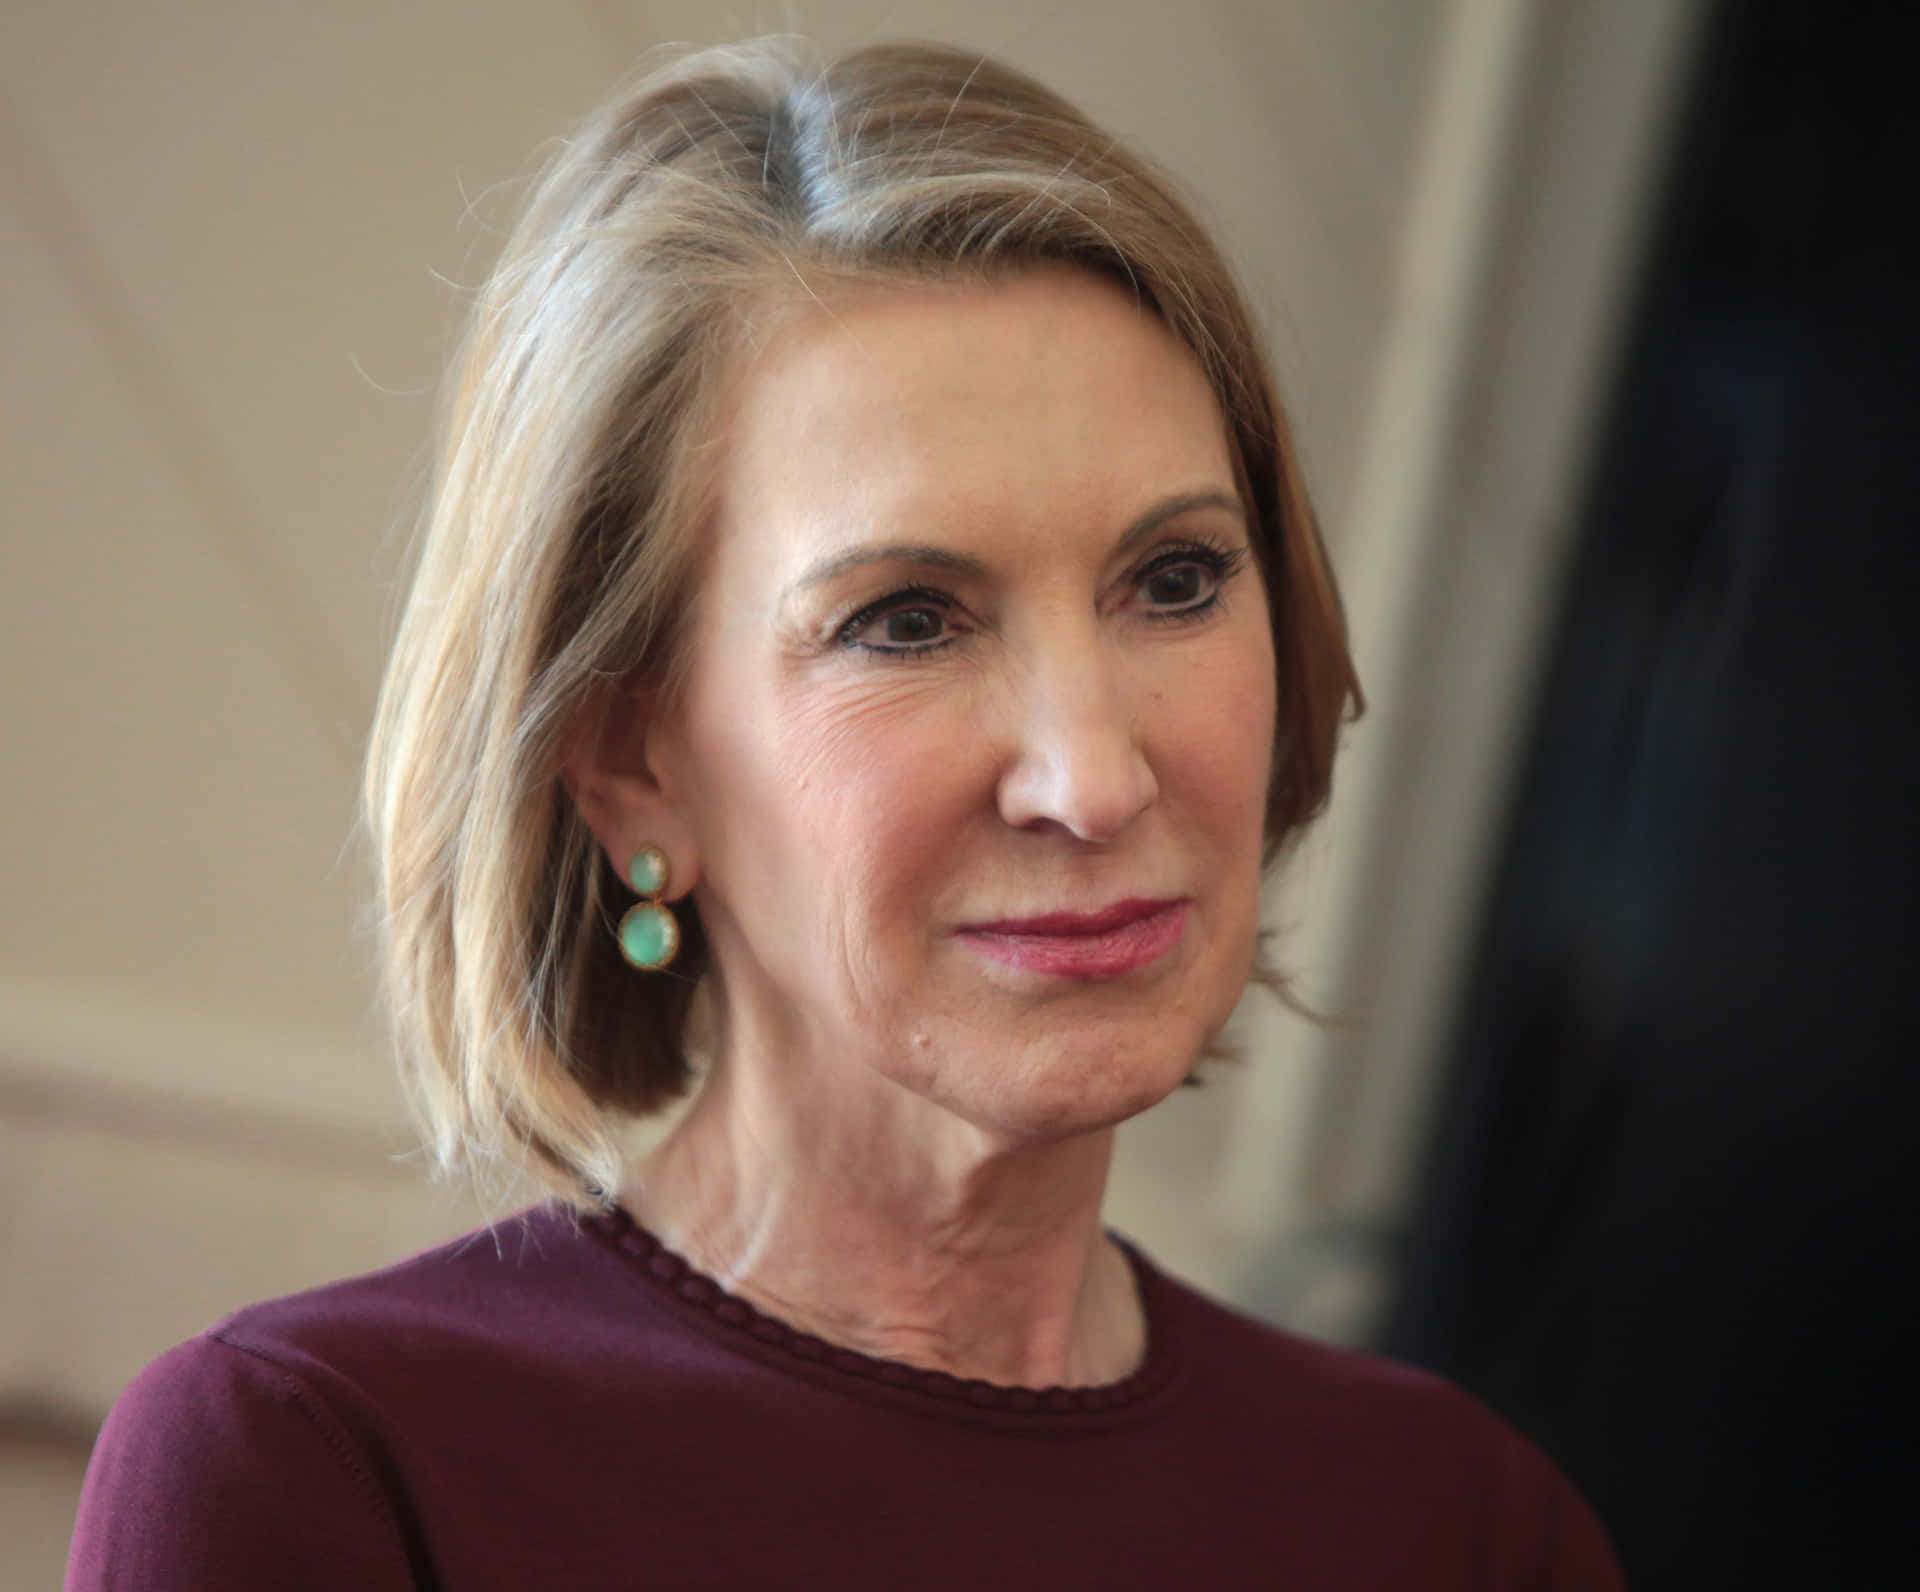 Carly Fiorina With Green Earrings Background